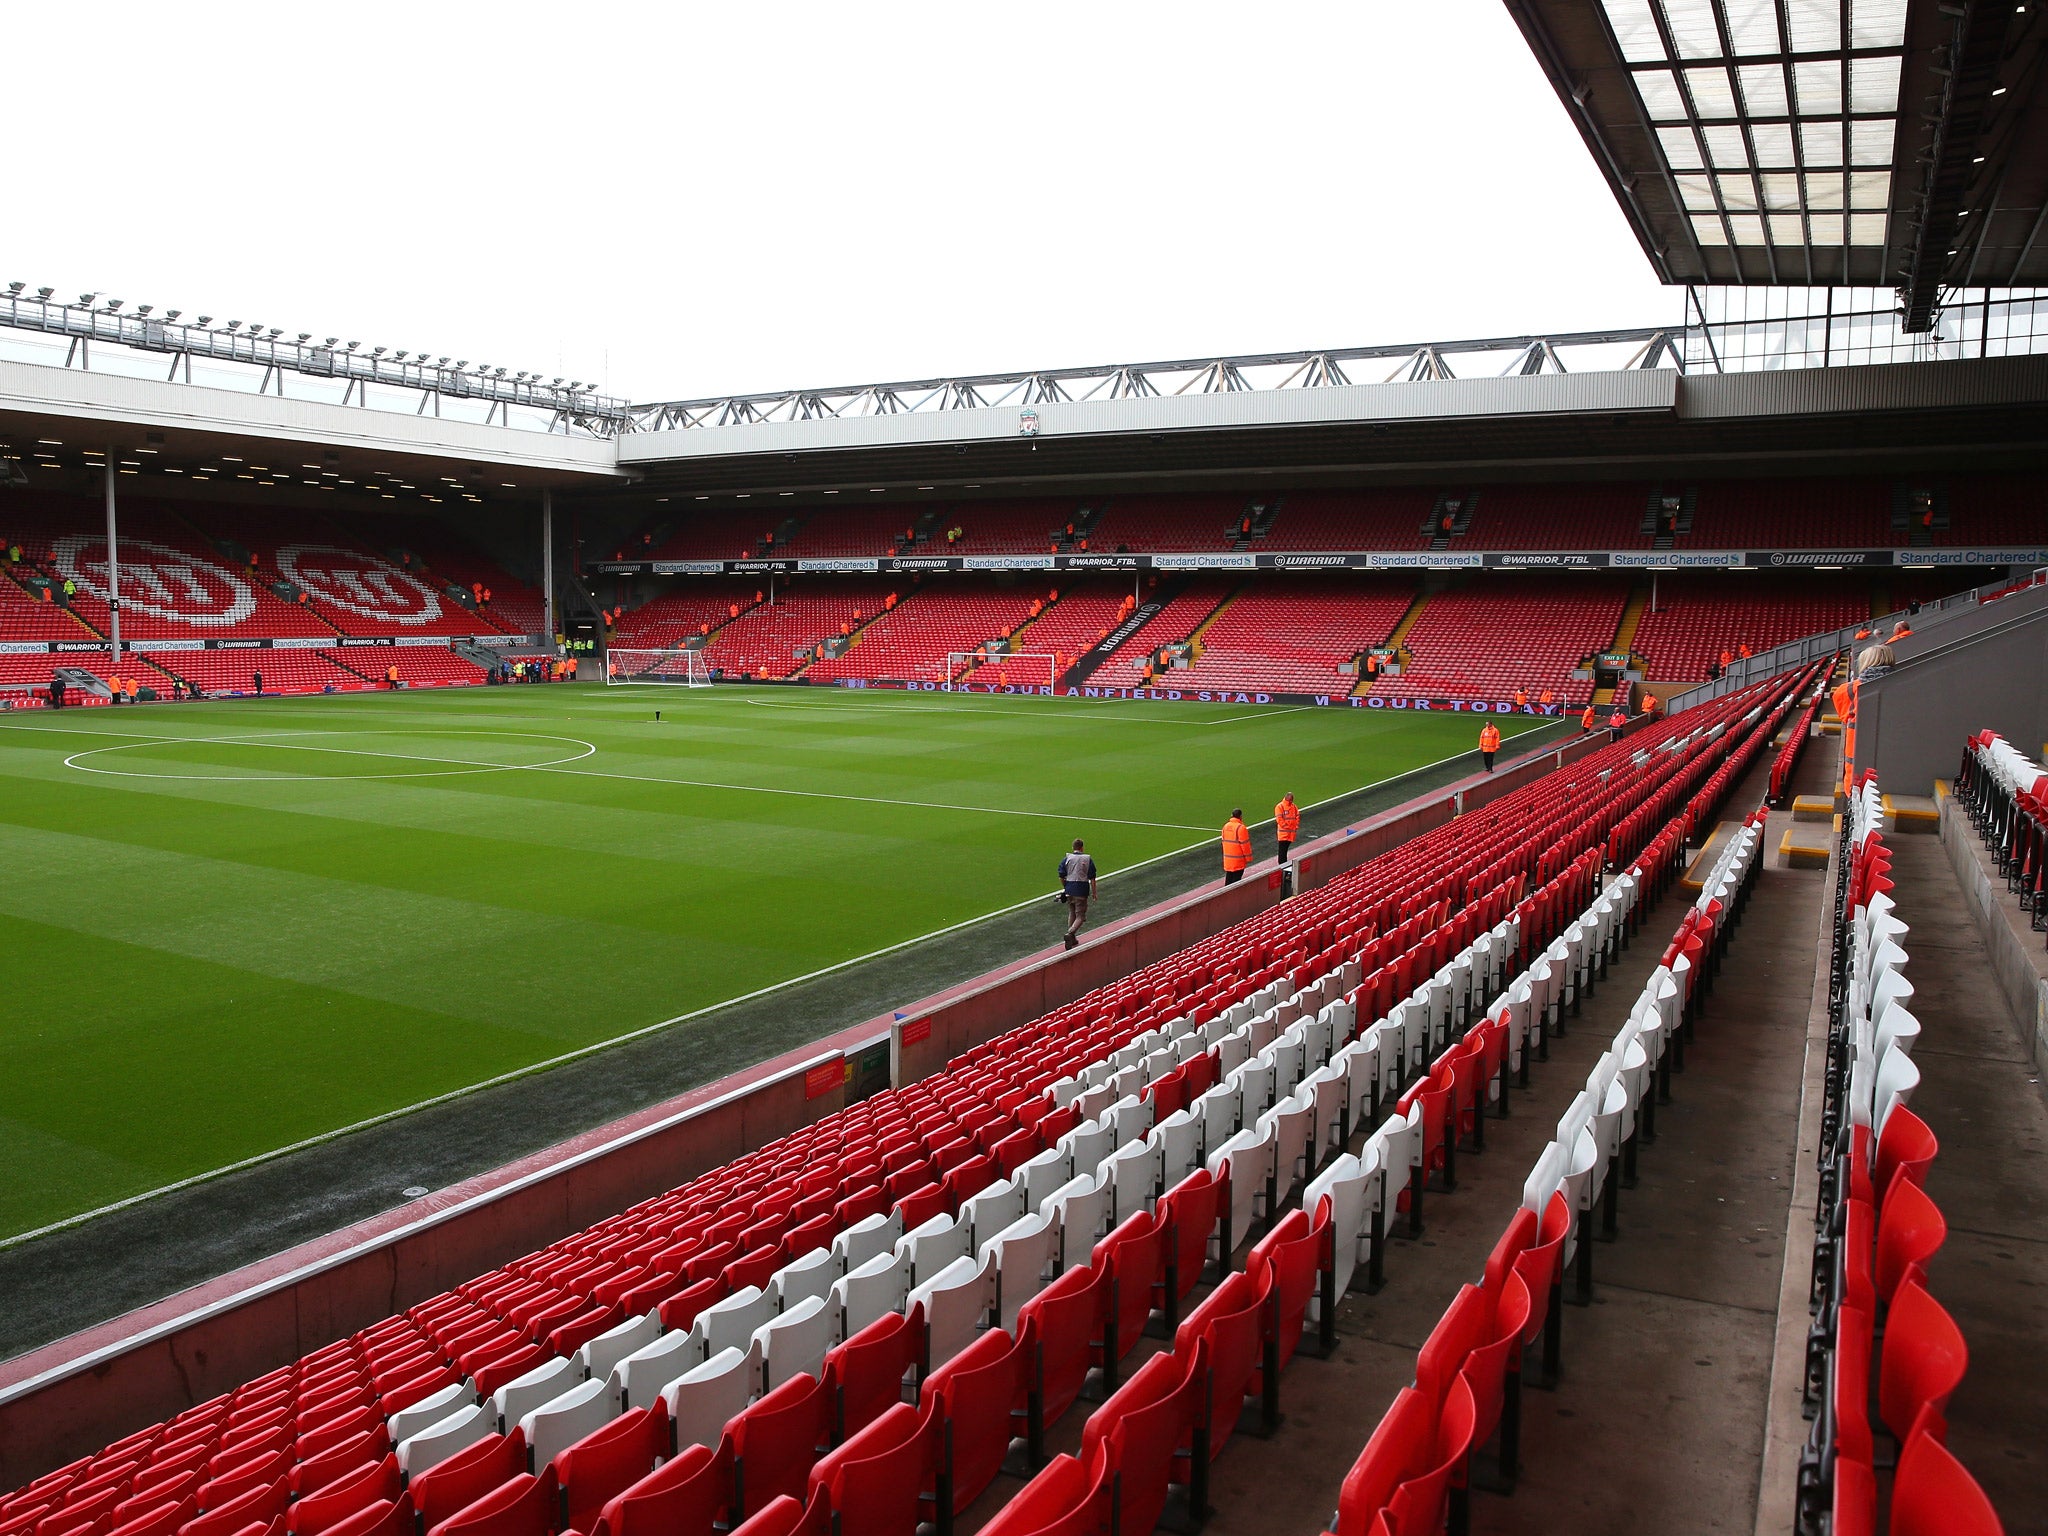 Anfield currently has a capacity of 45,522